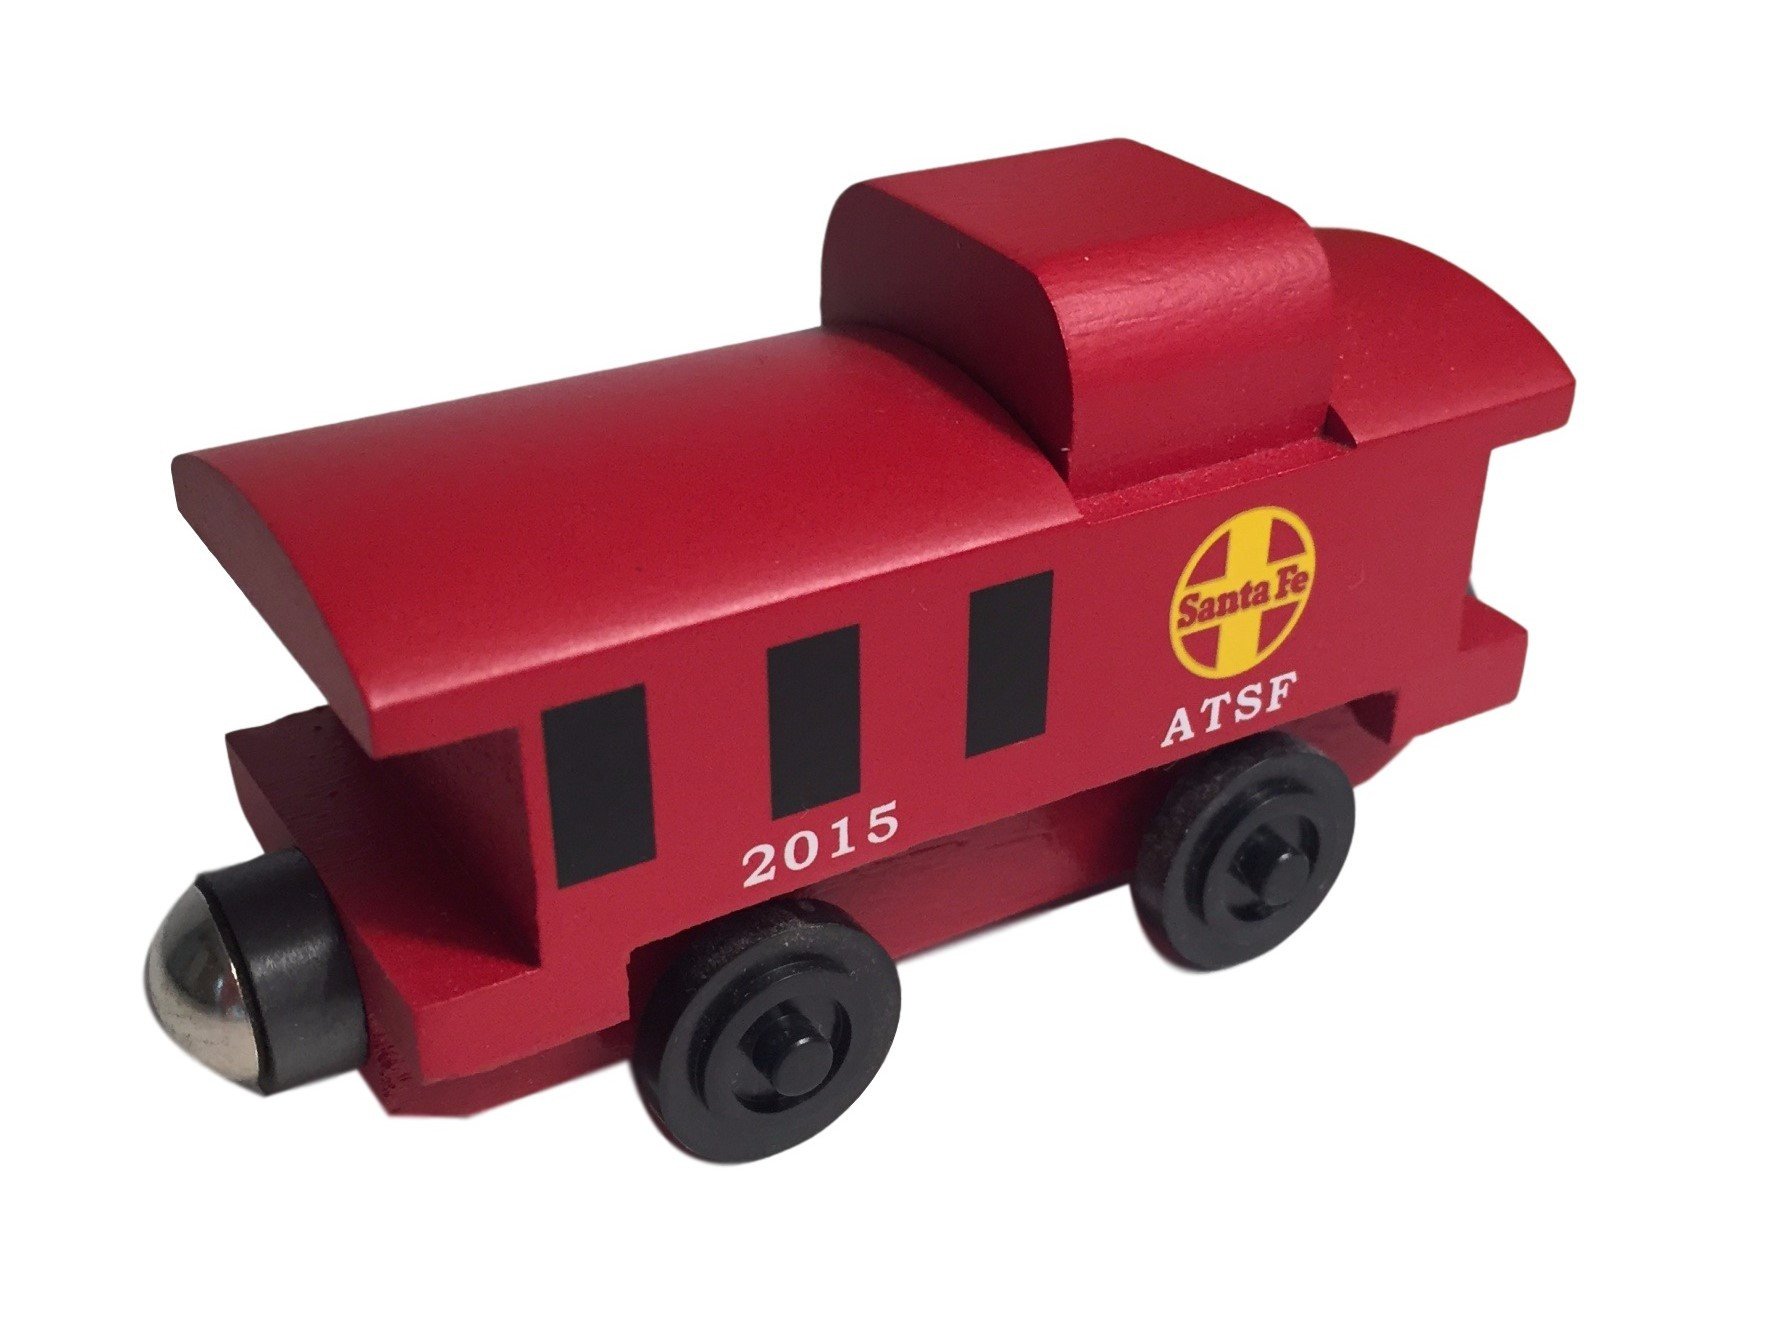 Santa Fe Caboose – The Whittle Shortline Railroad - Wooden Toy Trains!